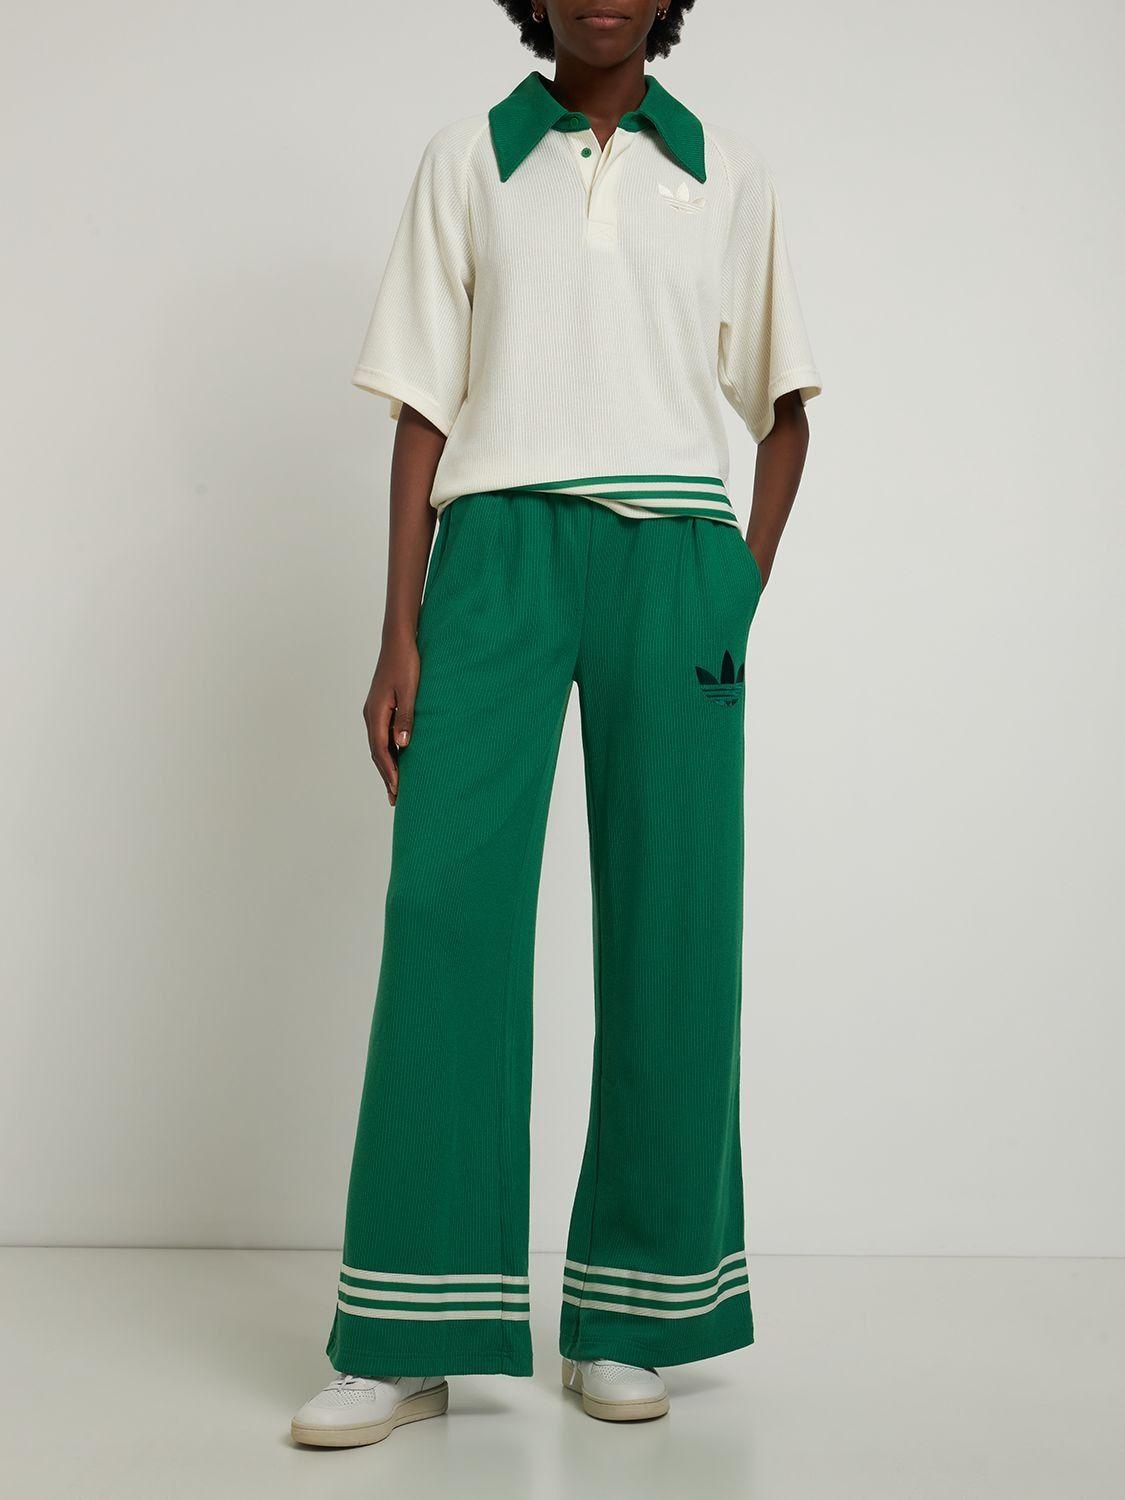 adidas Originals Knit Polo in Green | Lyst